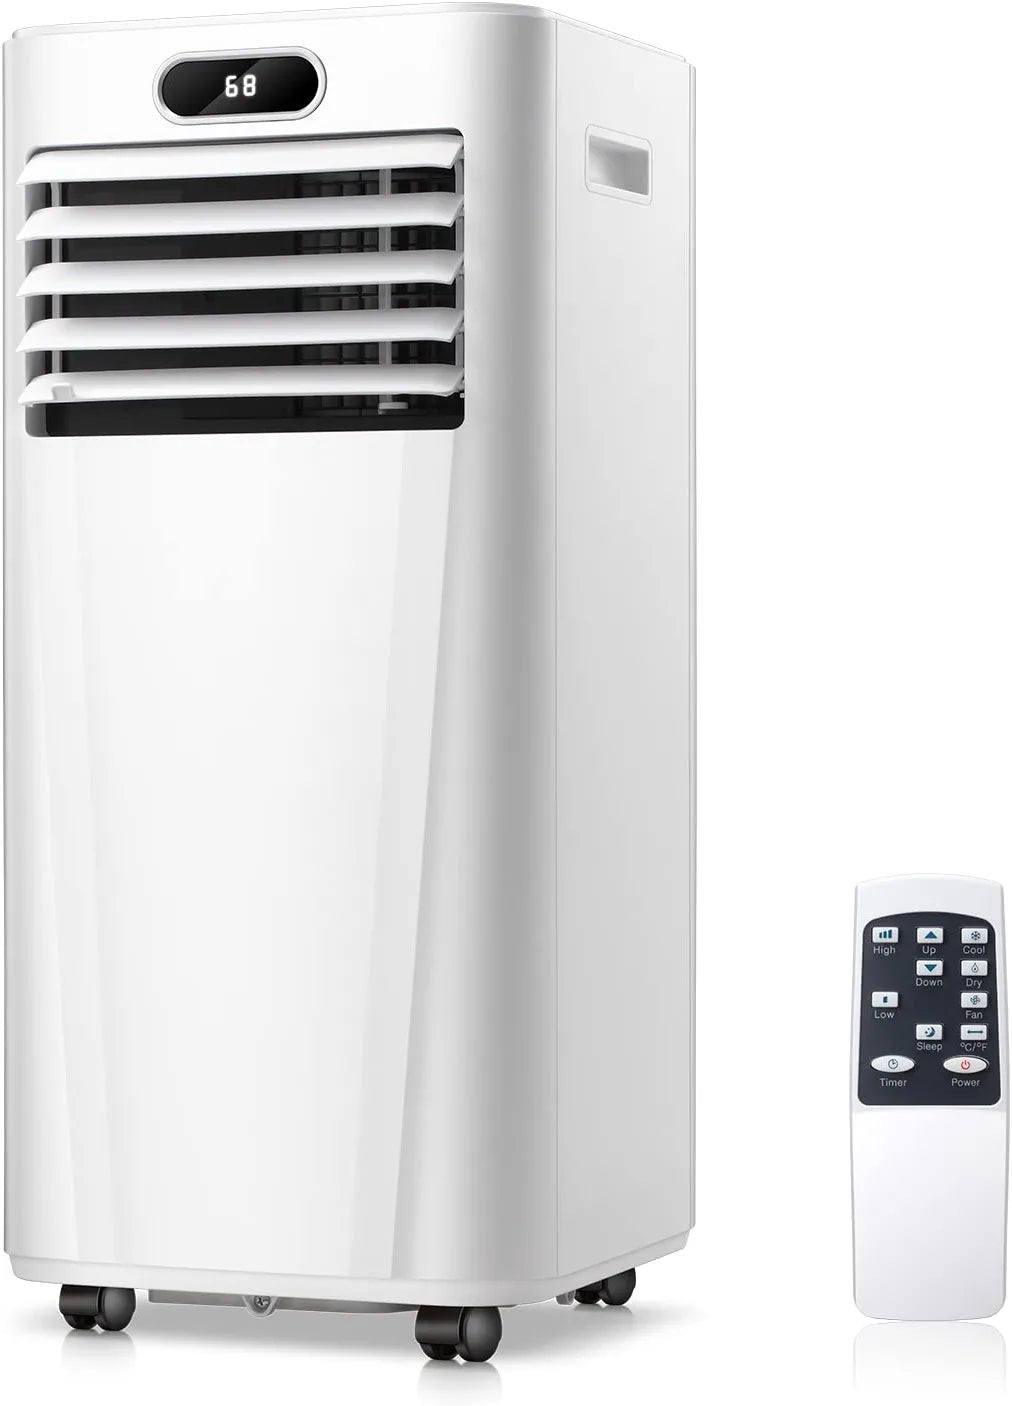 10000 BTU Portable Air Conditioner with Remote Control Cool to 400 square feet. Touch Screen, Portable AC Unit with Cooling, Dehumidifier, Fan 3-in-1